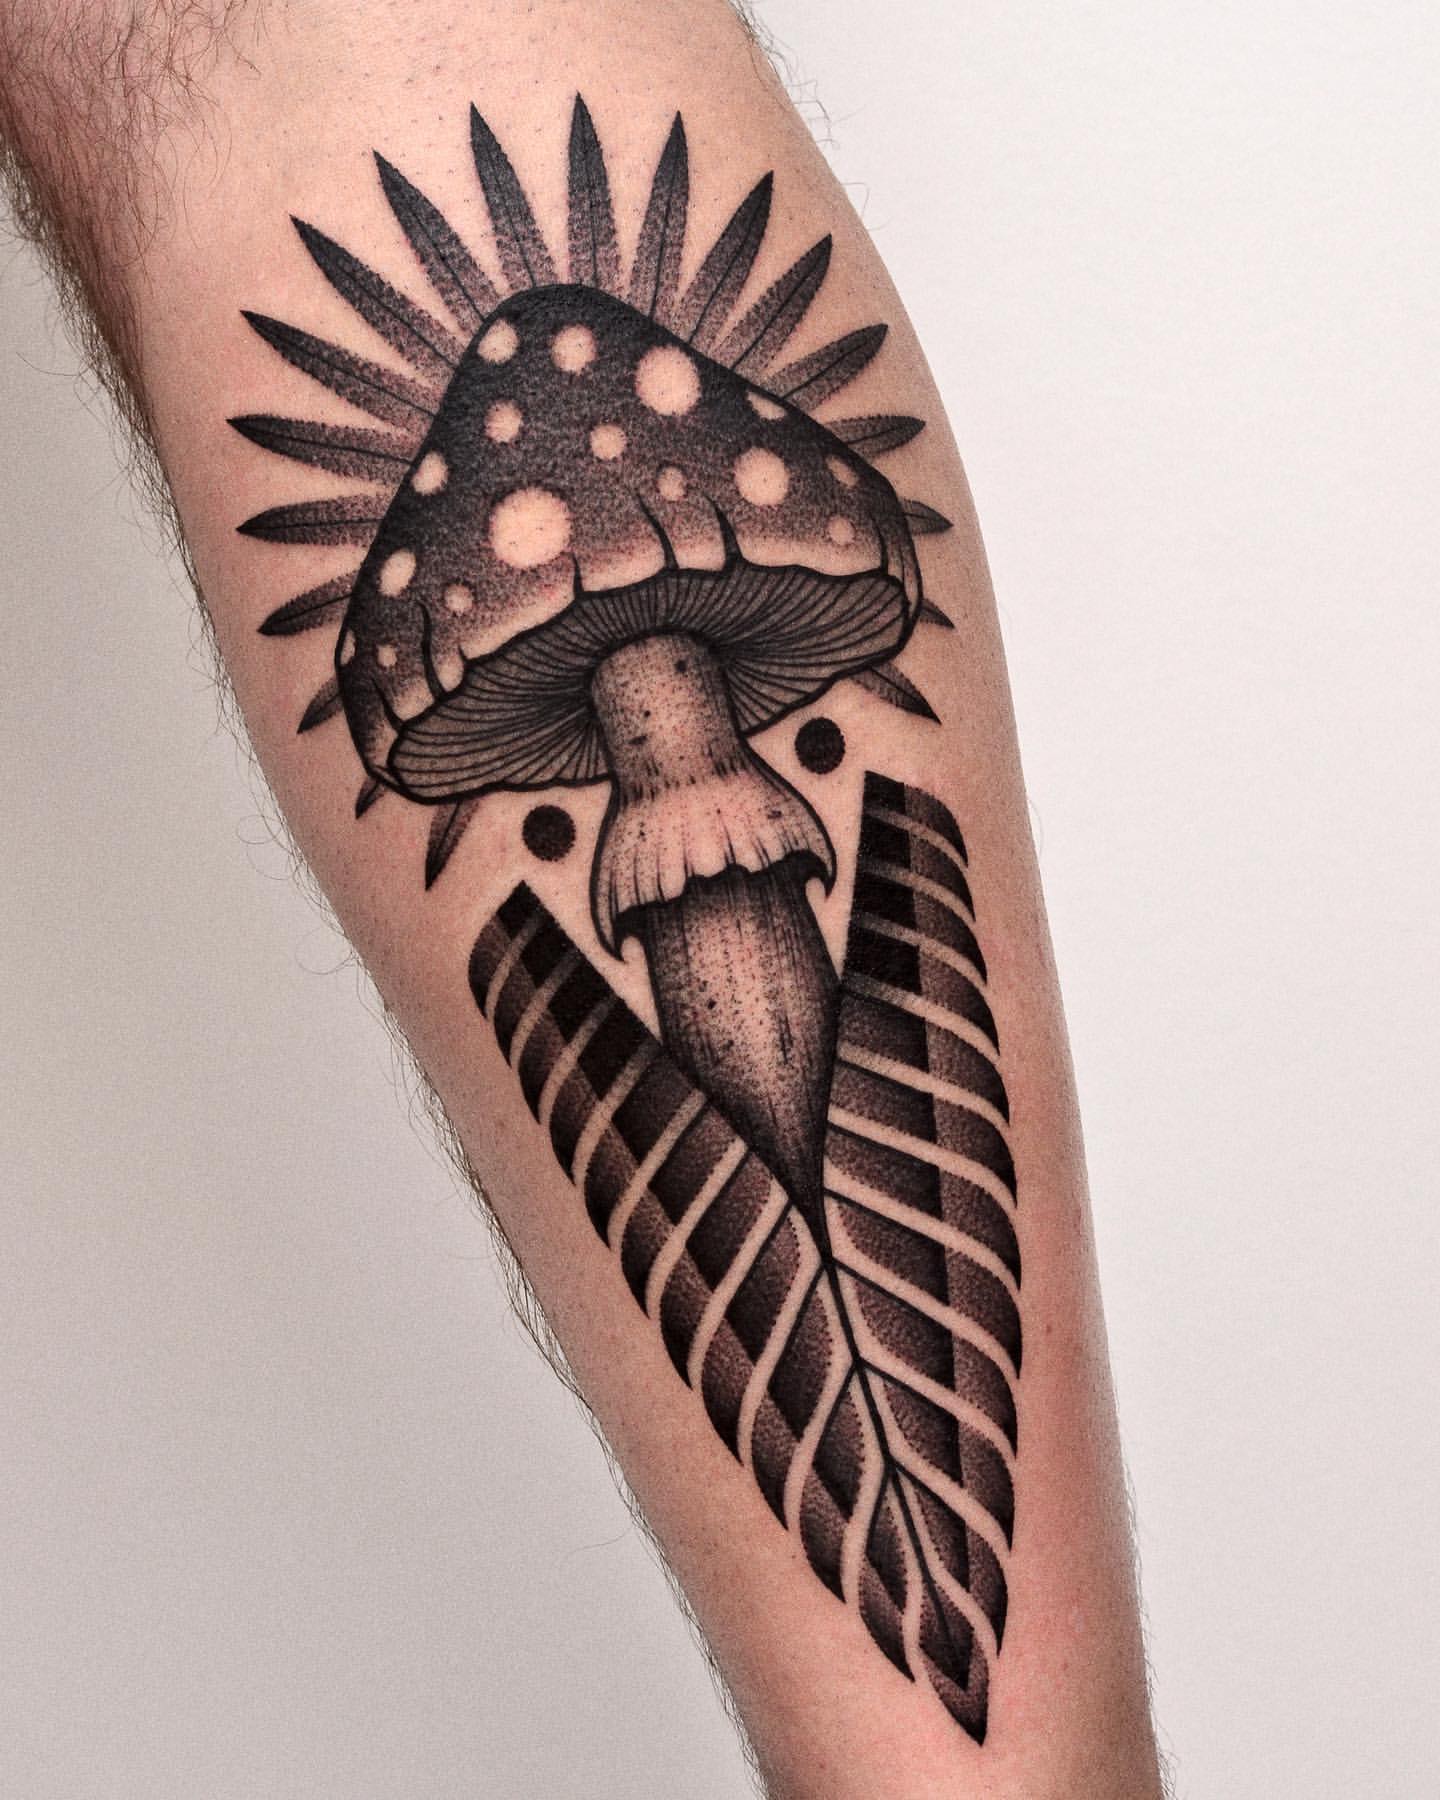 40 Euphoric Designs Of Mushroom Tattoos That Will Never Go Out Of Style